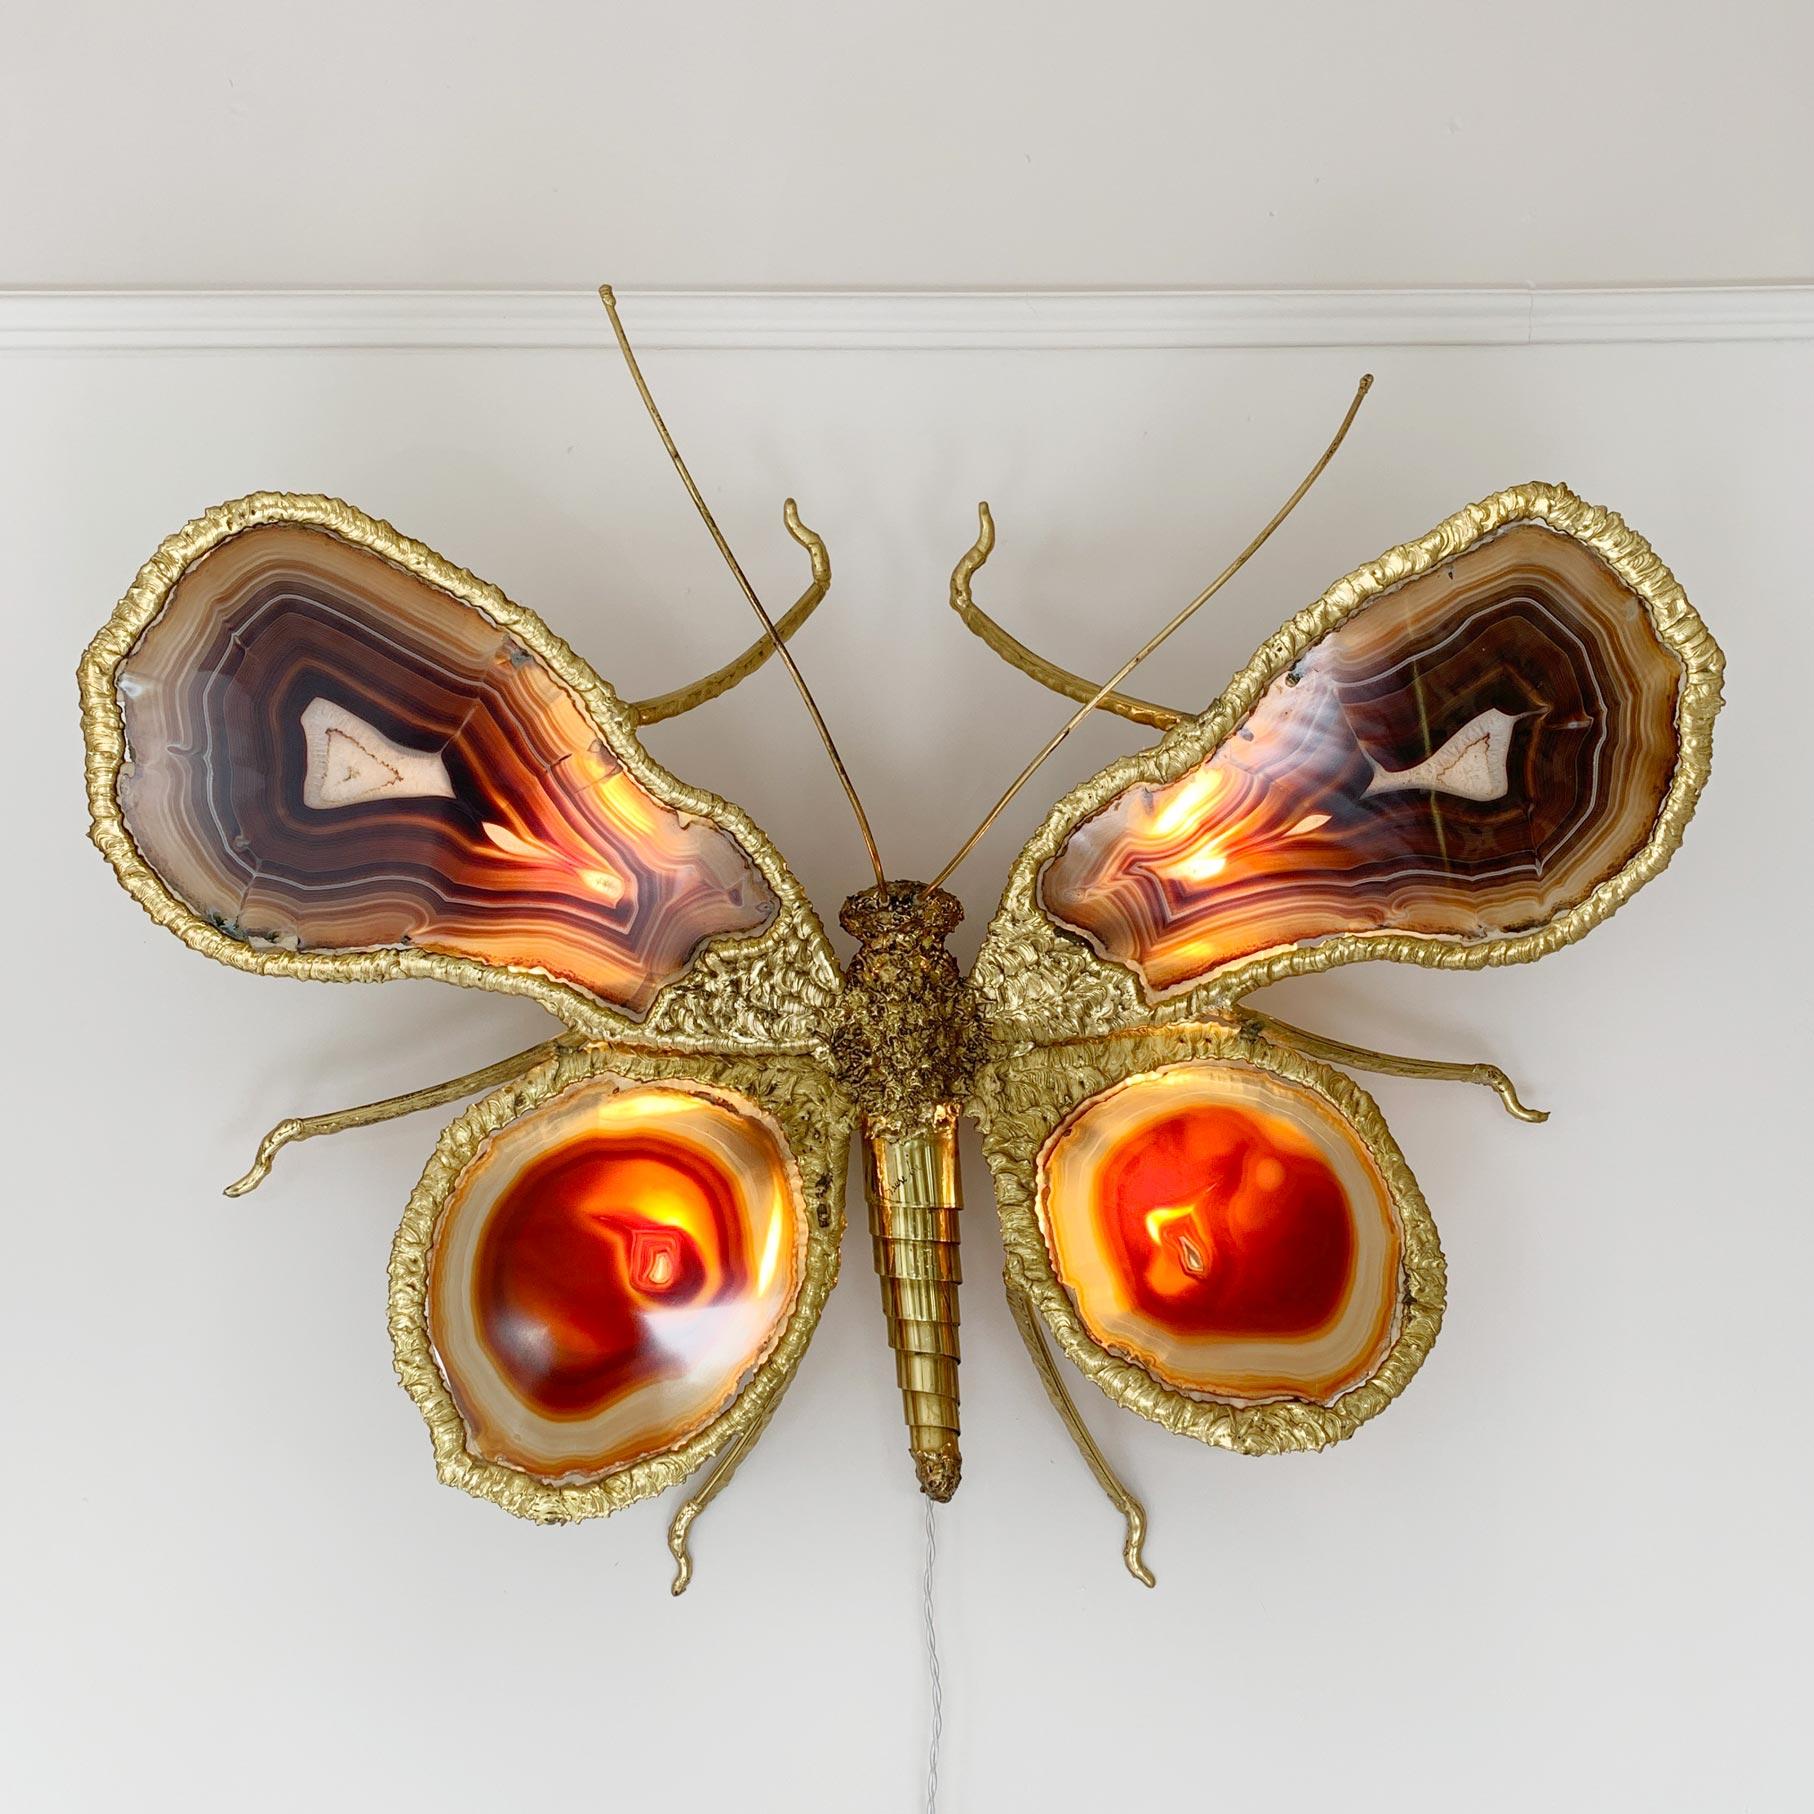 An incredibly rare sculpture by world renowned sculptor Isabelle Faure, in hand worked brass and agate. The enormous butterfly spans over 80cm in diameter and the stunning agate wings are all illuminated from below with four E14 bulbs, each with